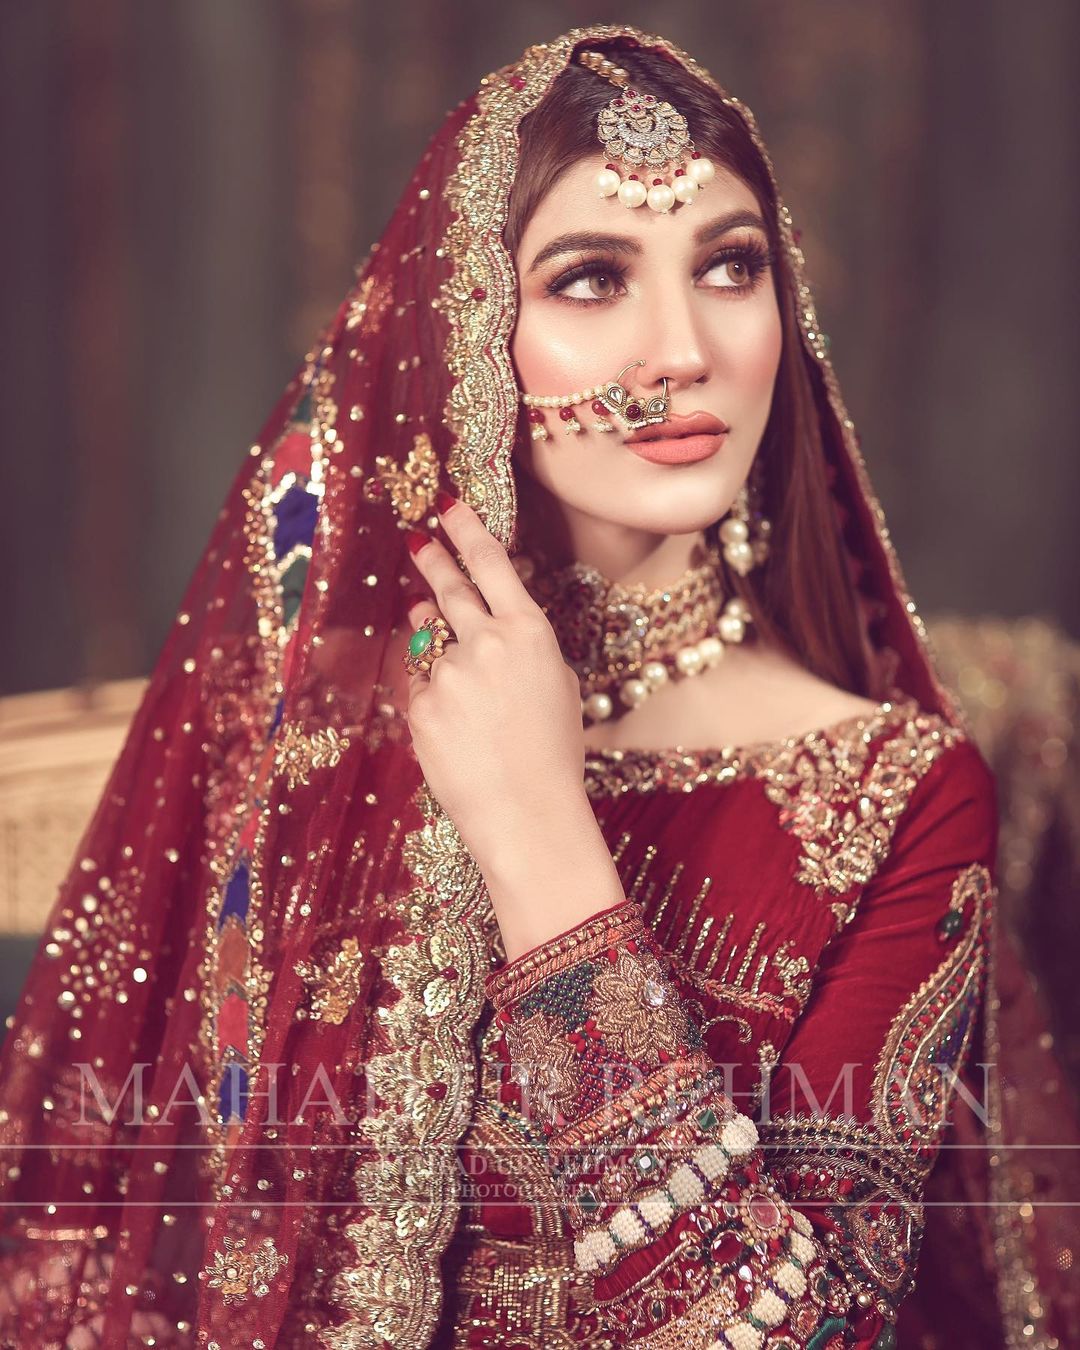 Nazish Jahangir Stuns As A Traditional Bride In Her Latest Shoot ...